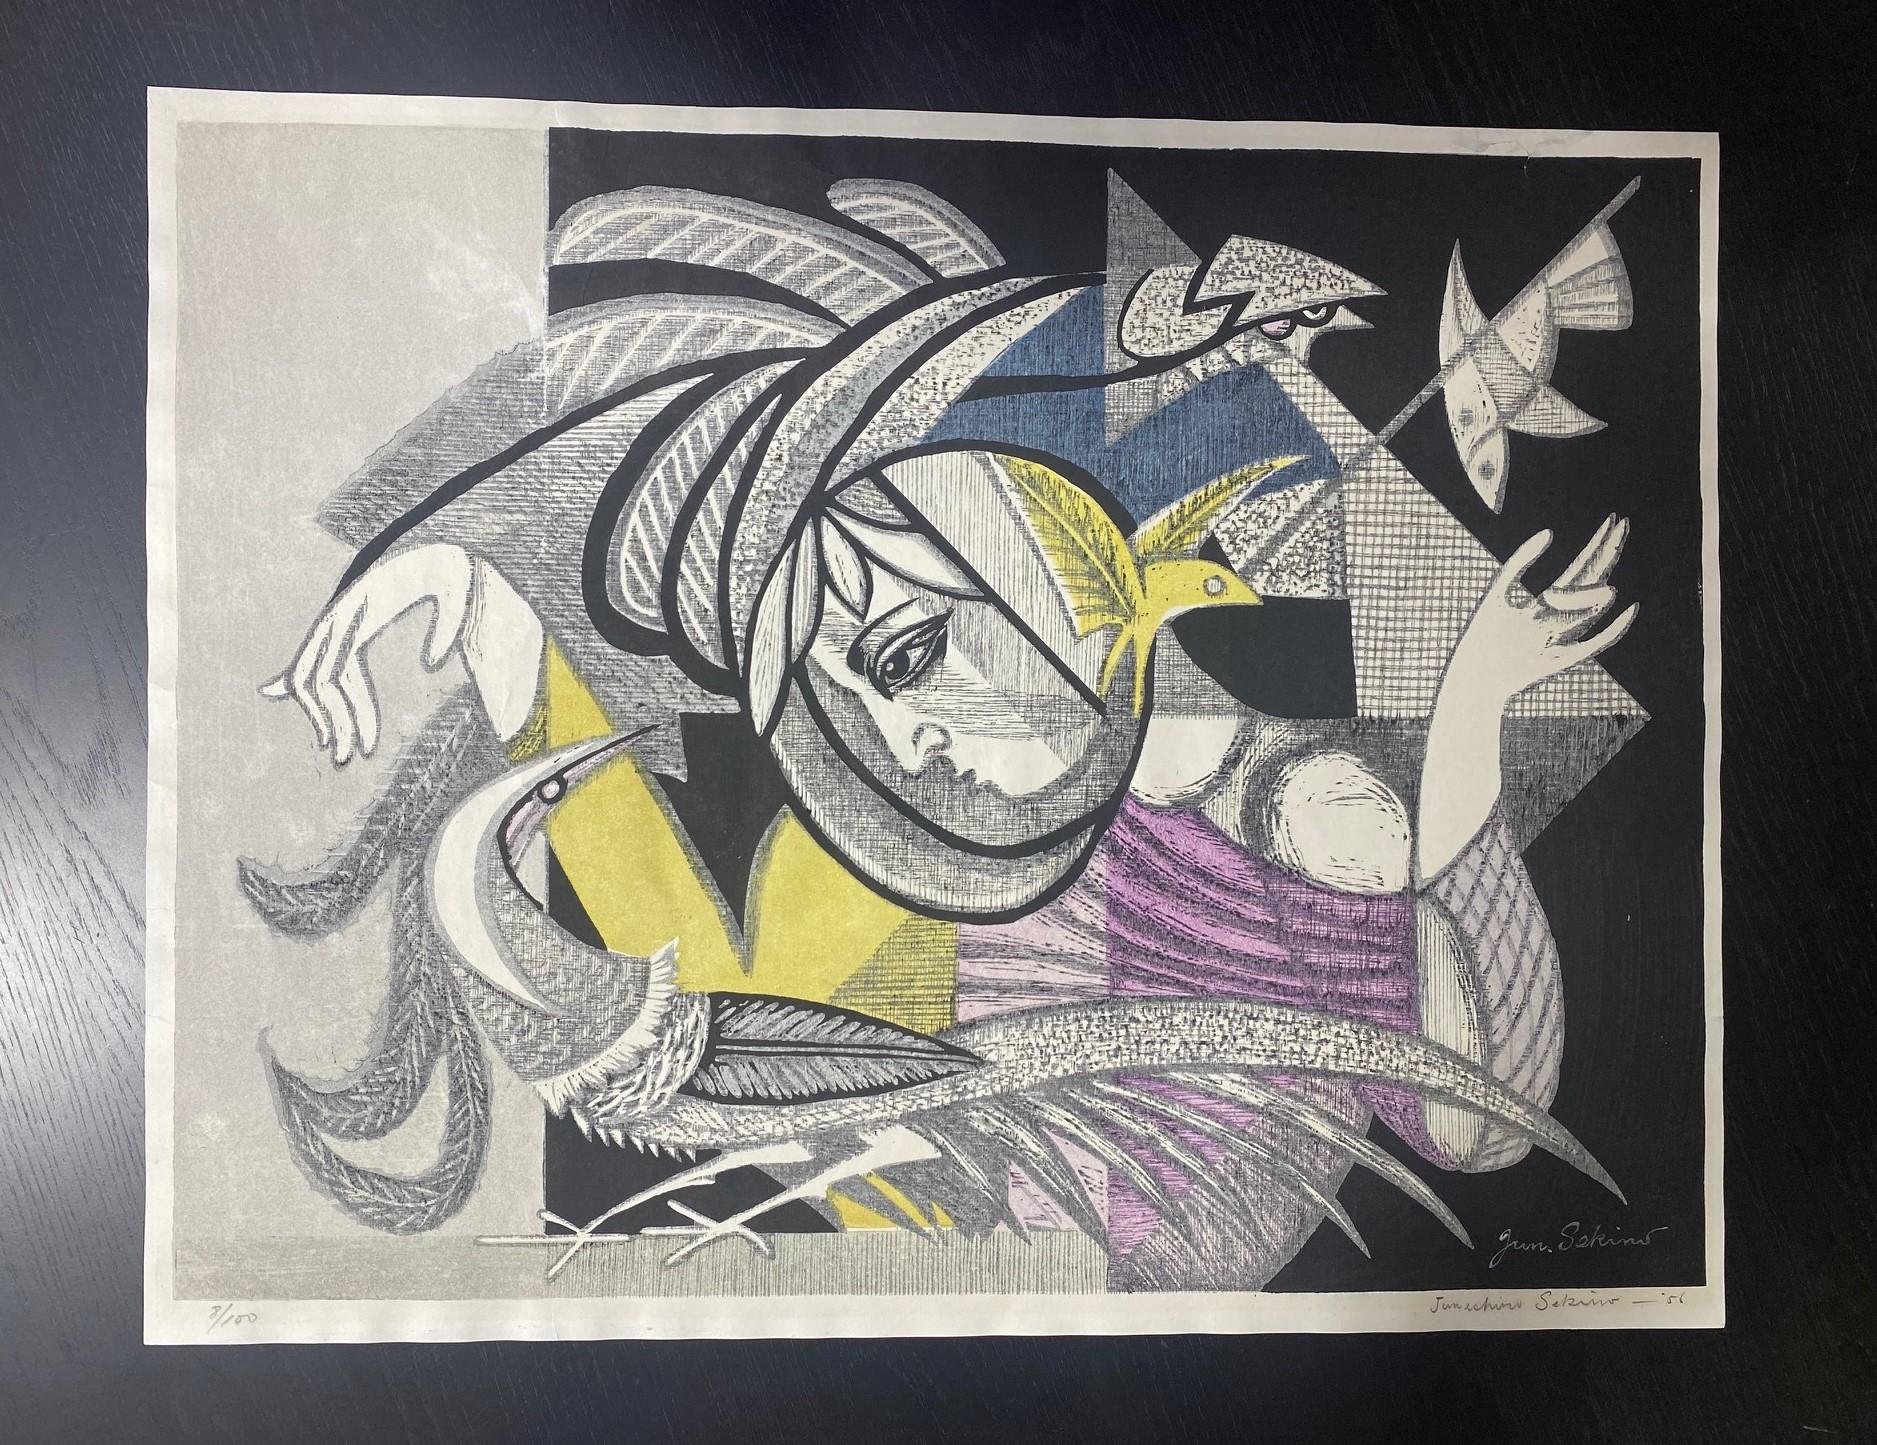 A truly wonderful and exceedingly rare abstract limited edition woodblock print by famed Japanese artist/printmaker Junichiro Sekino.

This print, which appears to be titled 